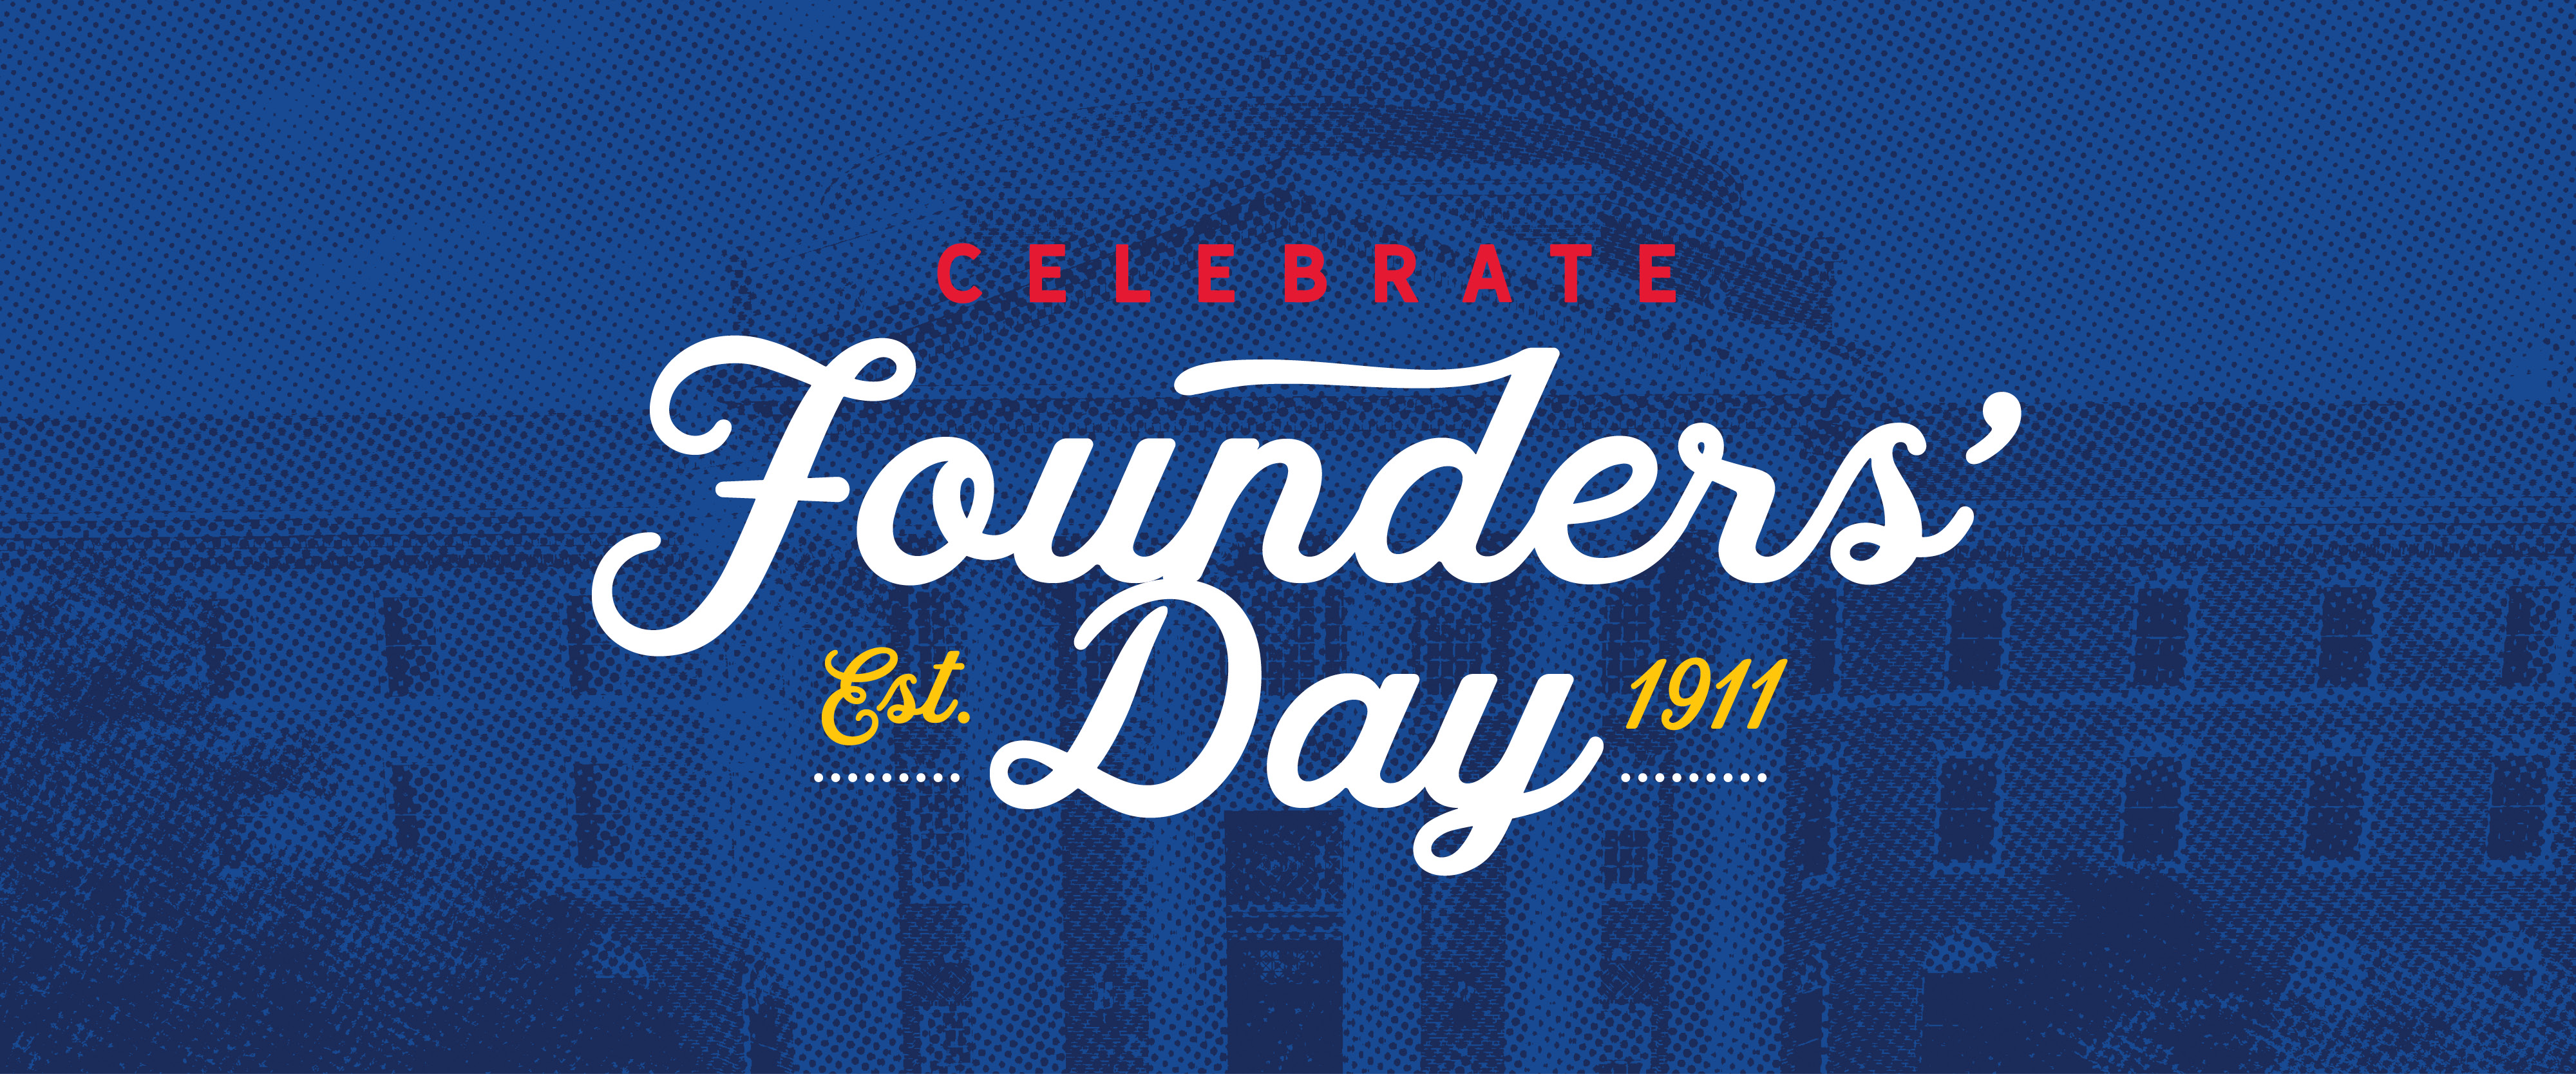 Celebrate Founders' Day